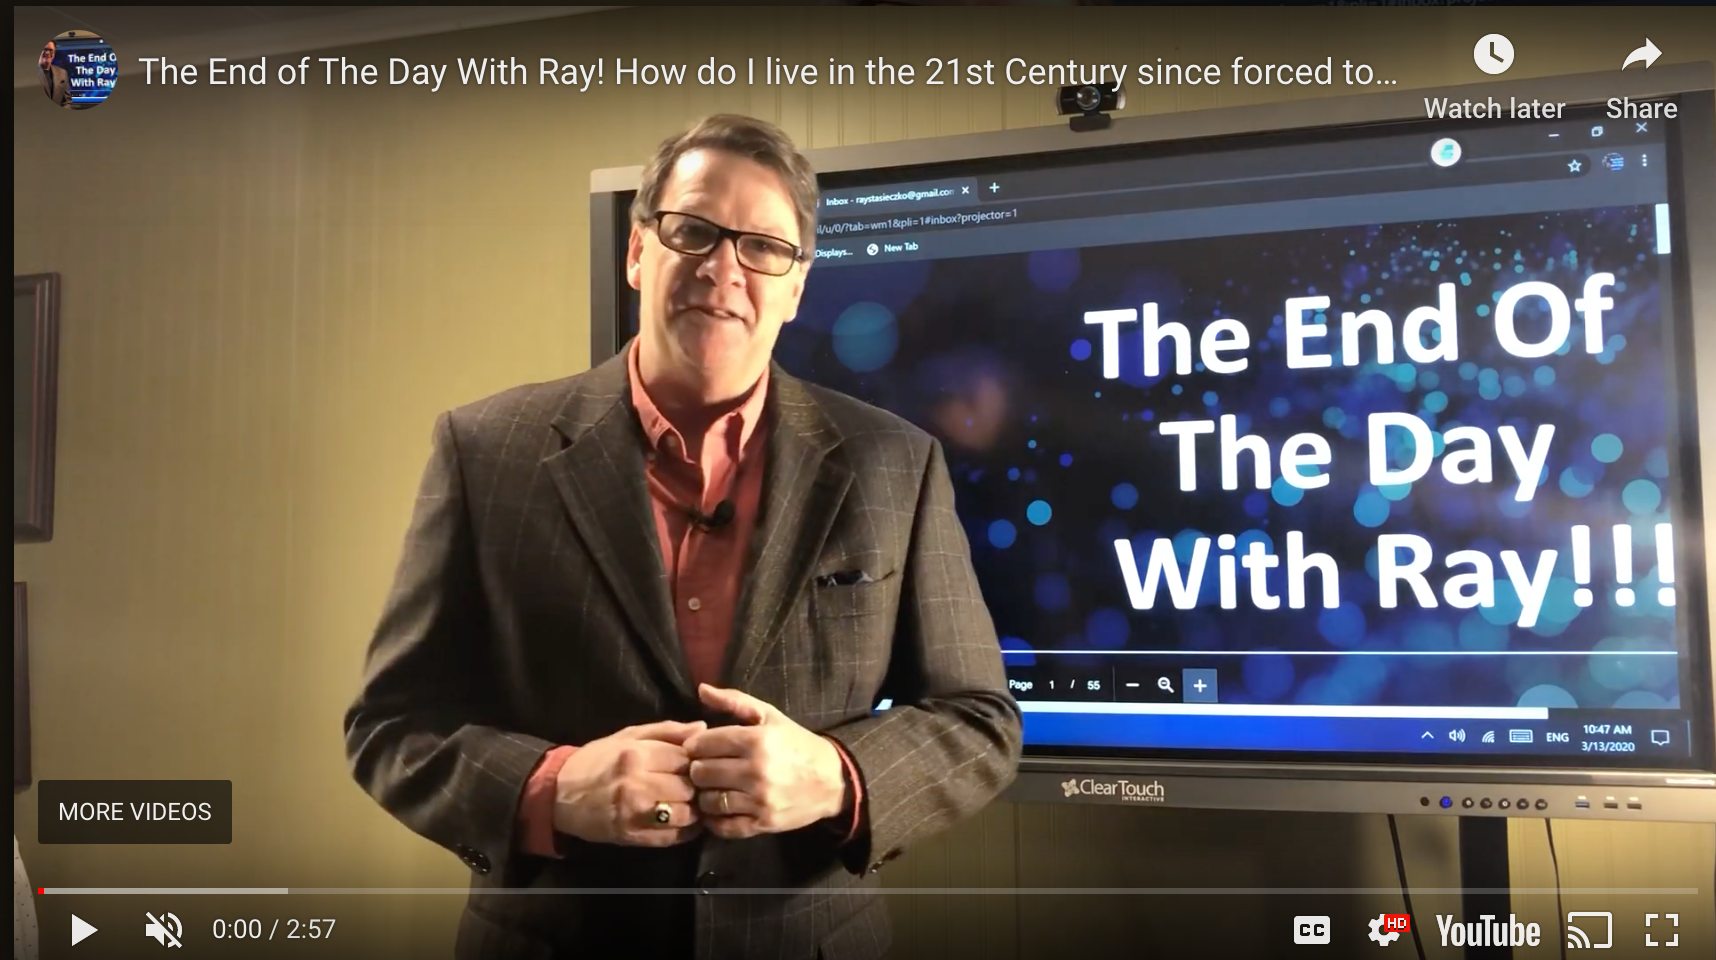 The End of The Day With Ray! How do I live in the 21st Century since forced to leave the 20th